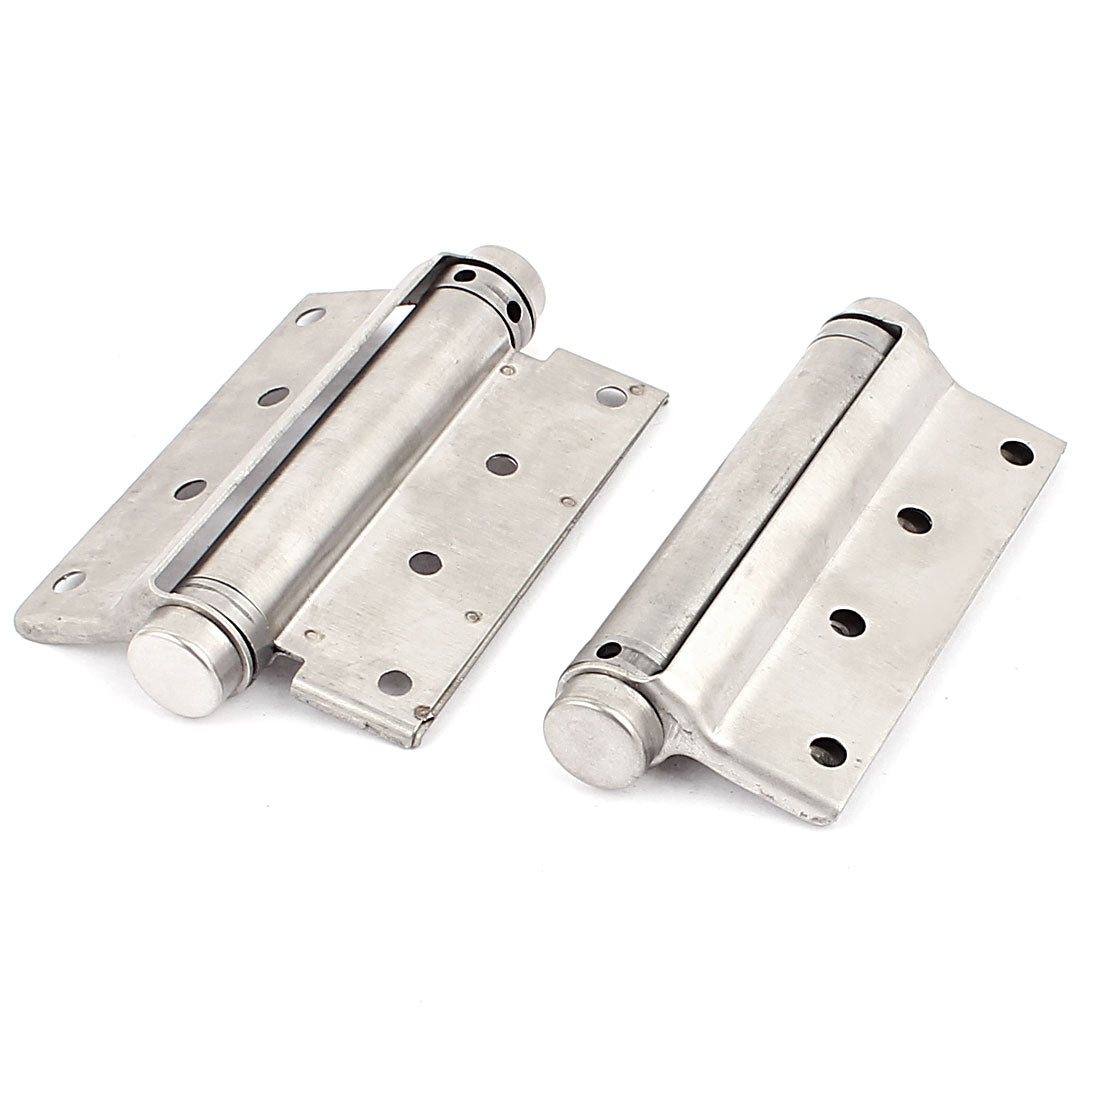 uxcell Uxcell 100mm Length Stainless Steel Square Corner Single Action Spring Door Hinge 2Pcs